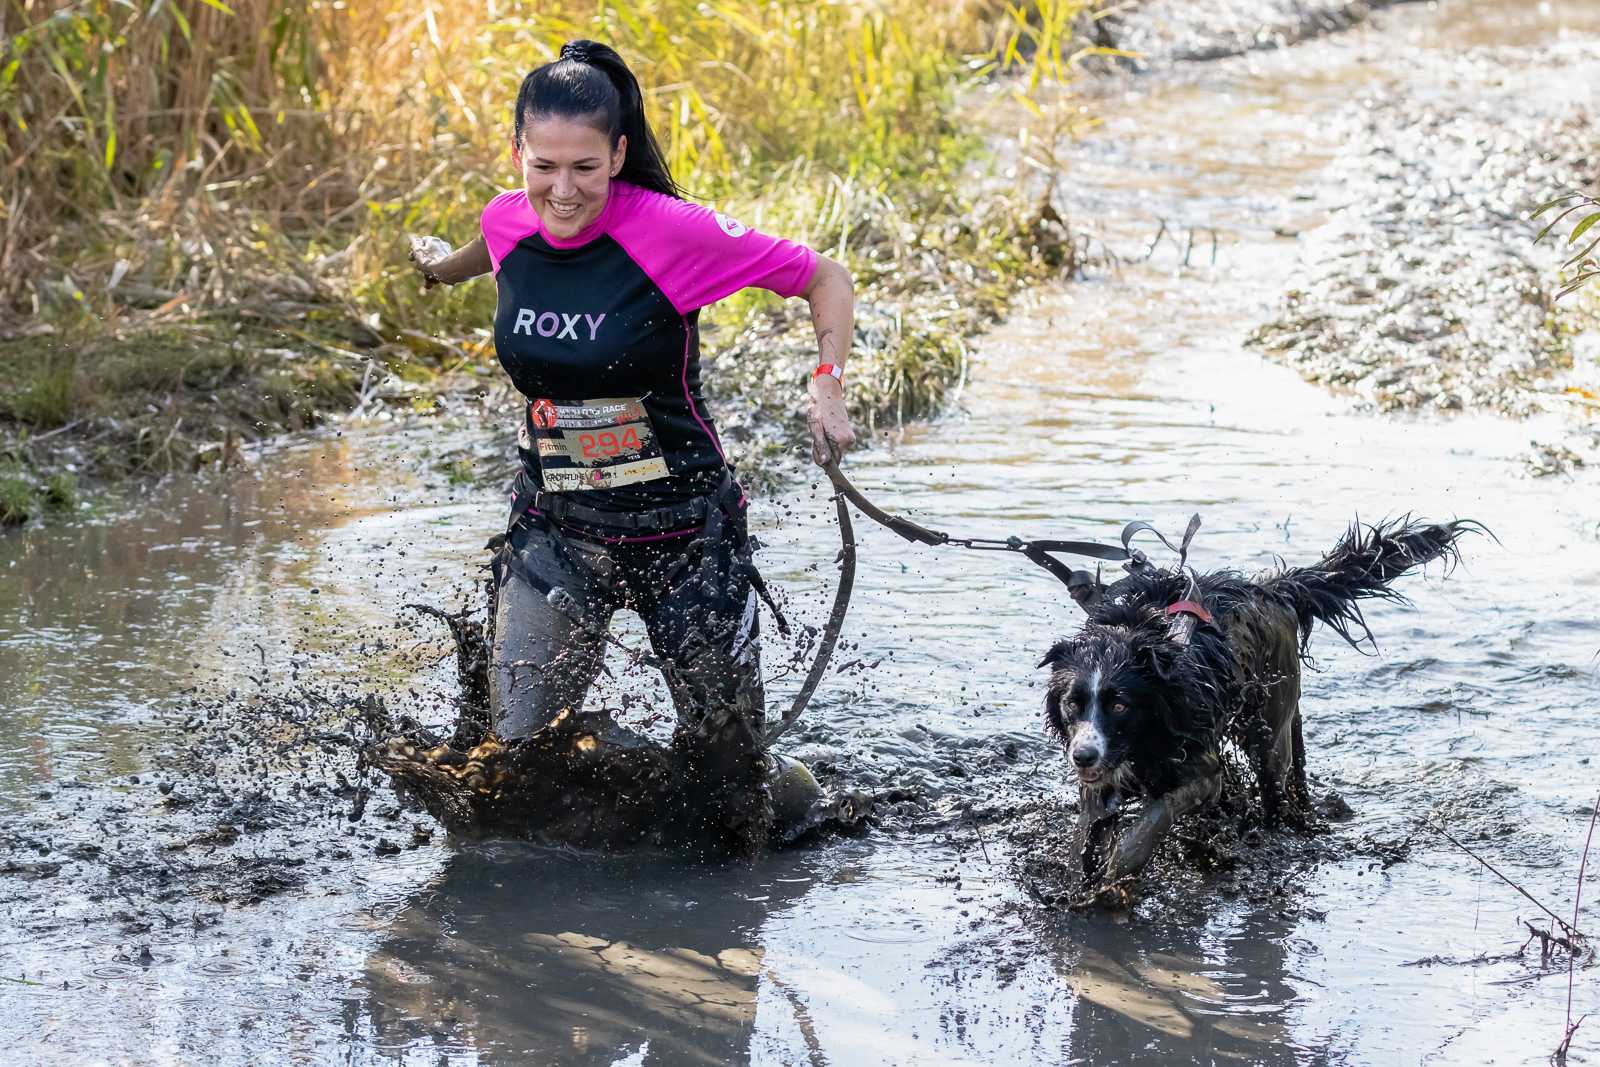 How to prepare your dog for an obstacle race